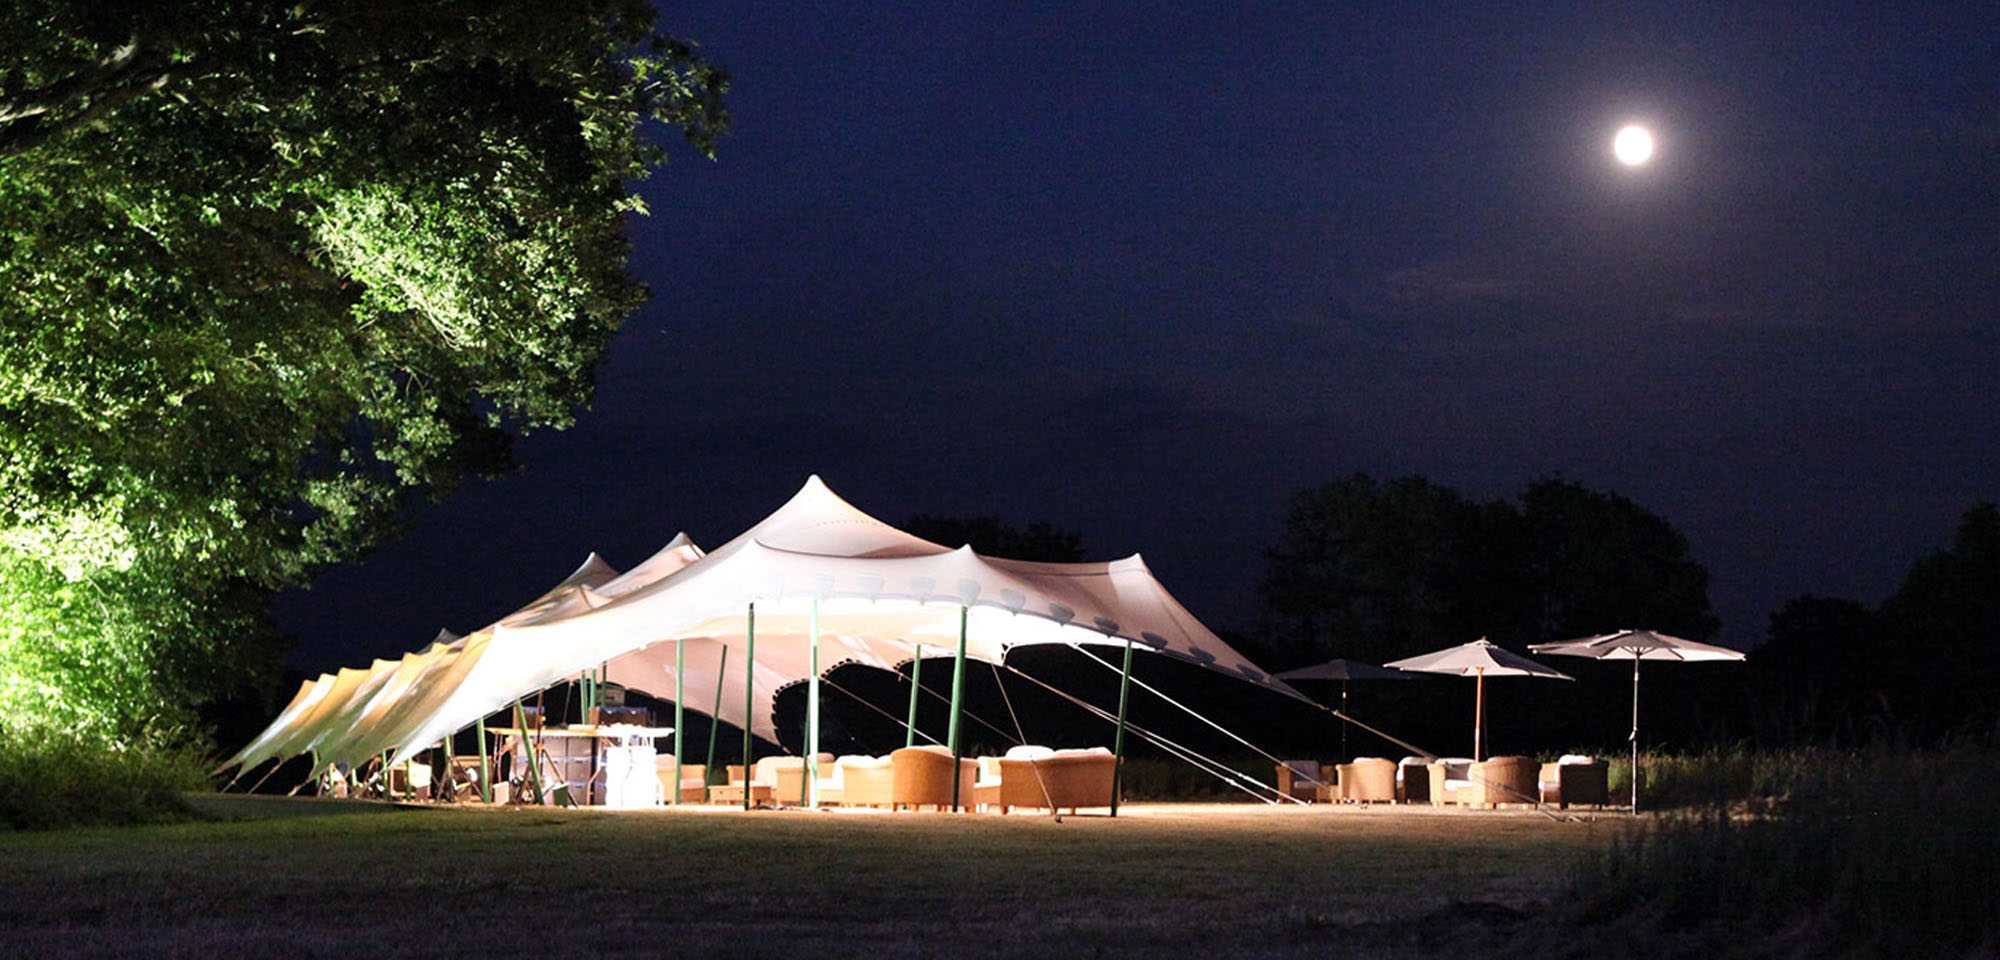 White stretch tent by moonlight, up lit trees.